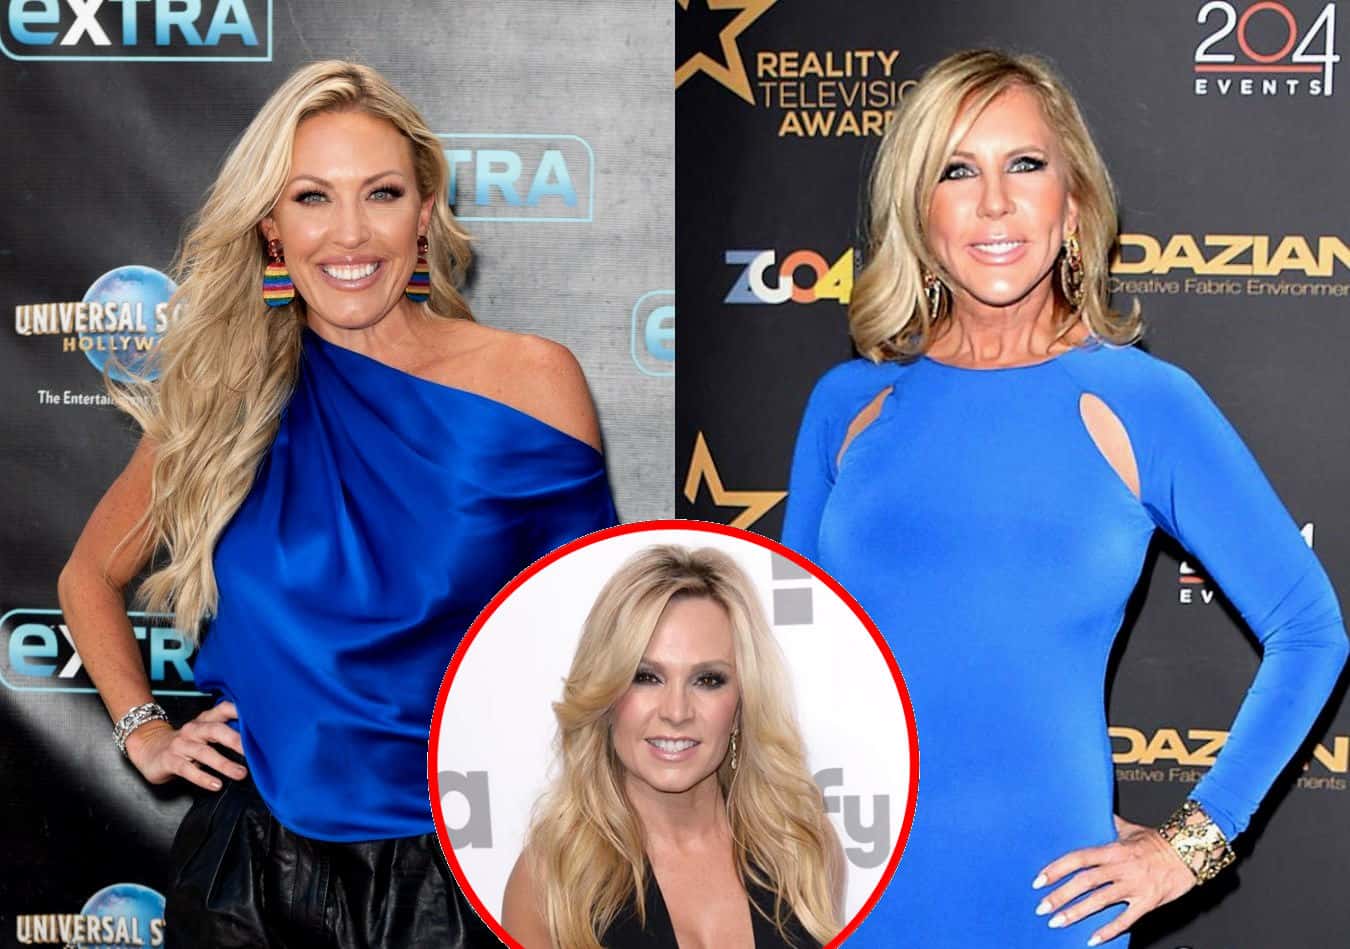 Braunwyn Windham-Burke Throws Shade at Vicki Gunvalson! Suggests 'RHOC' is More "Real" Since the Exits of Vicki and Tamra Judge